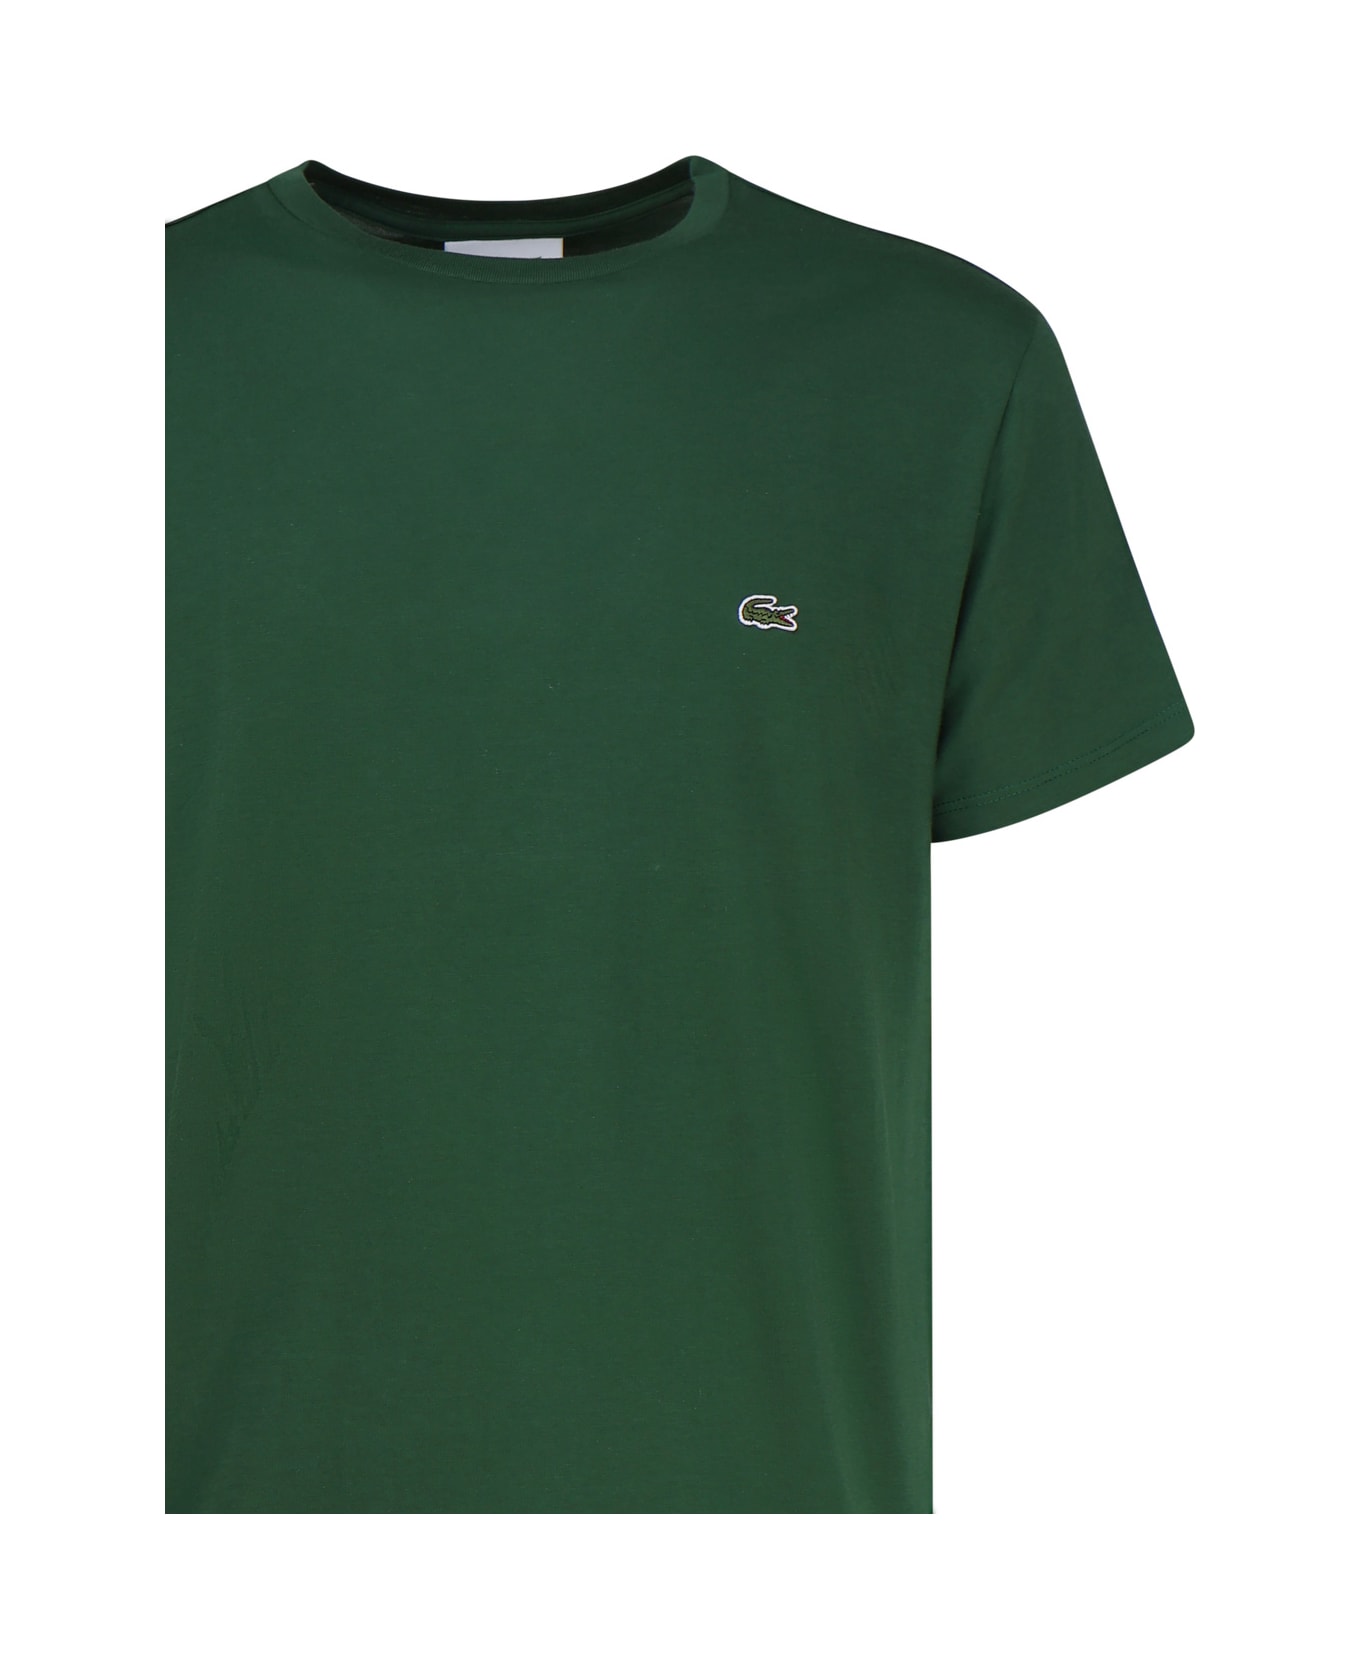 Lacoste Green T-shirt In Cotton Jersey - Green Tシャツ